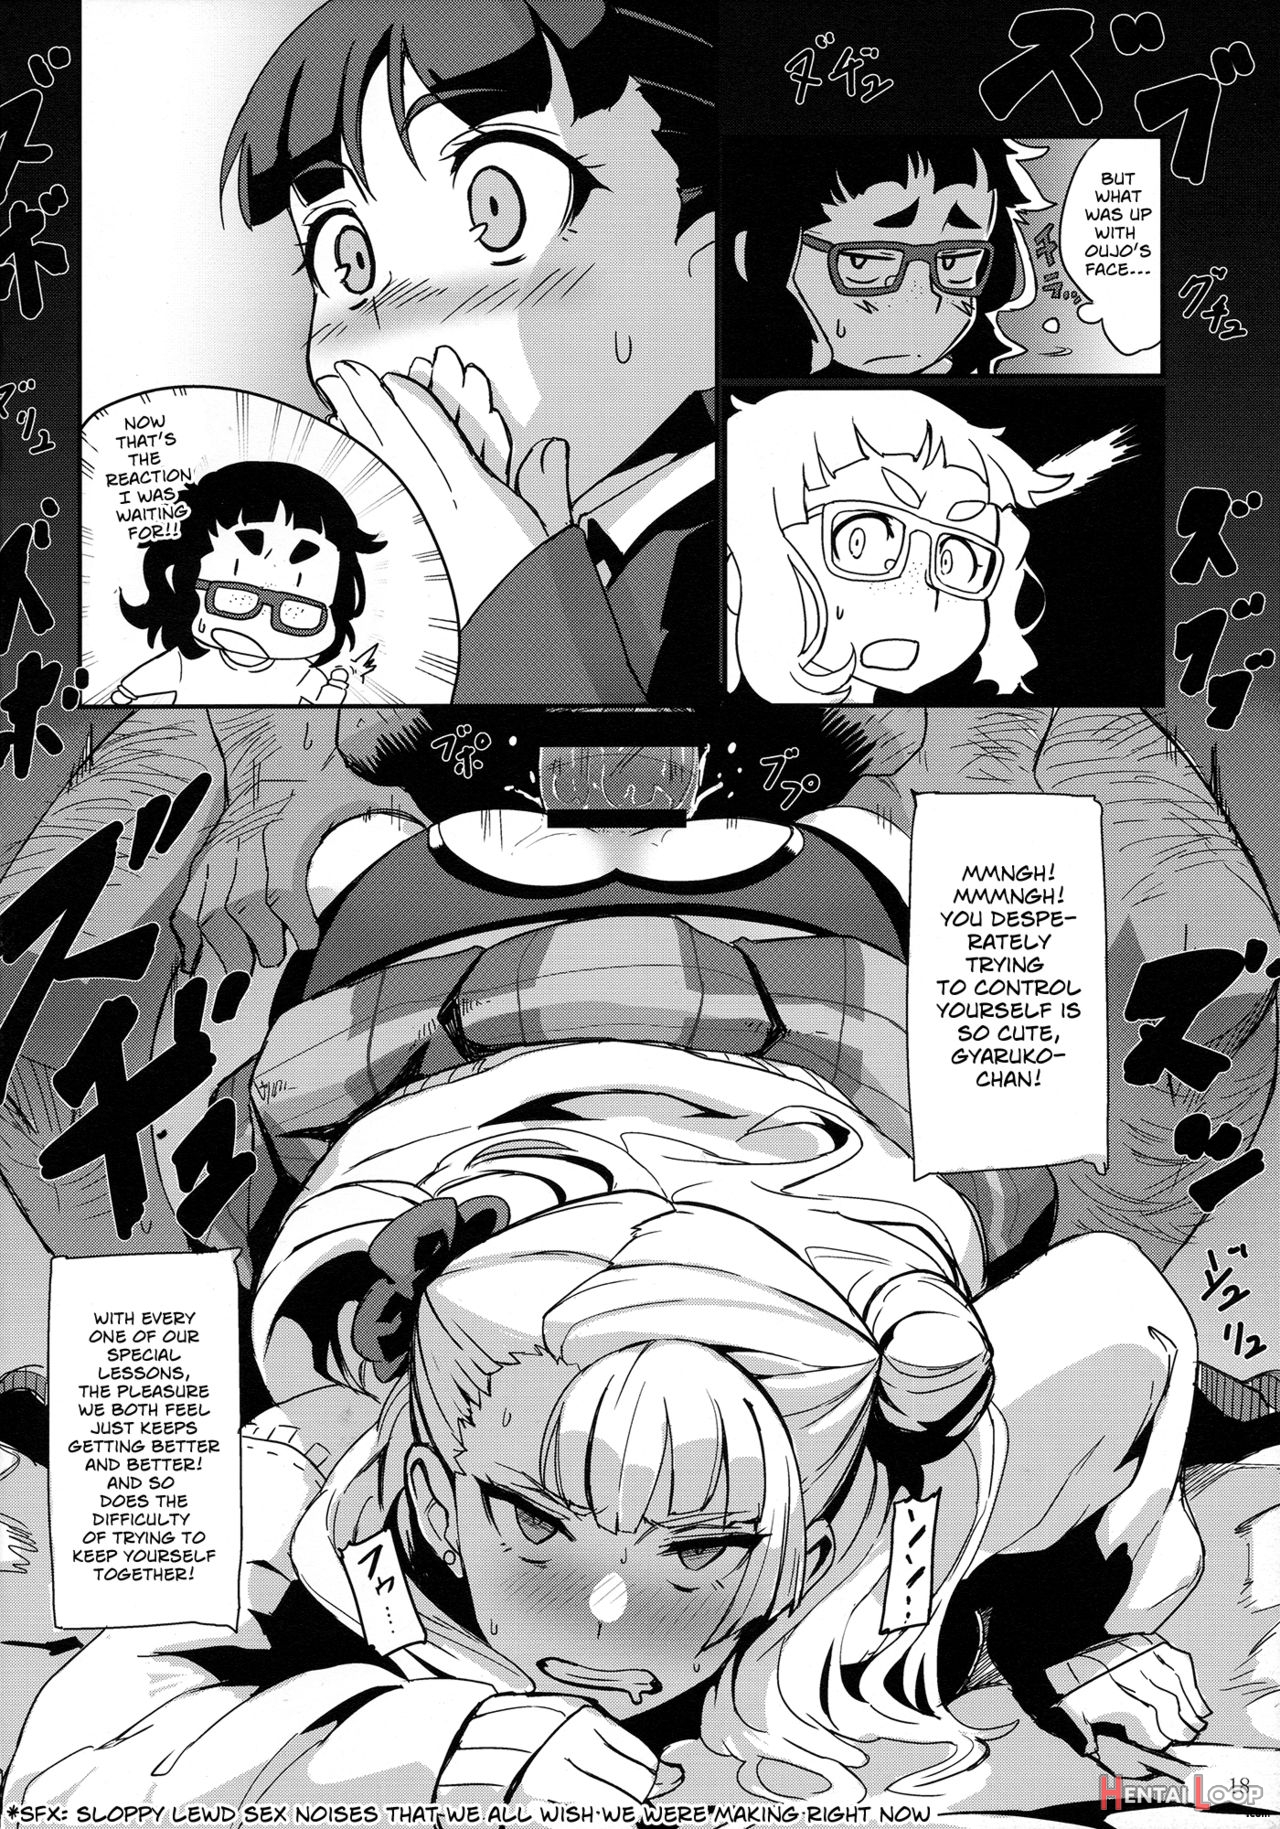 Galko Ah! page 17